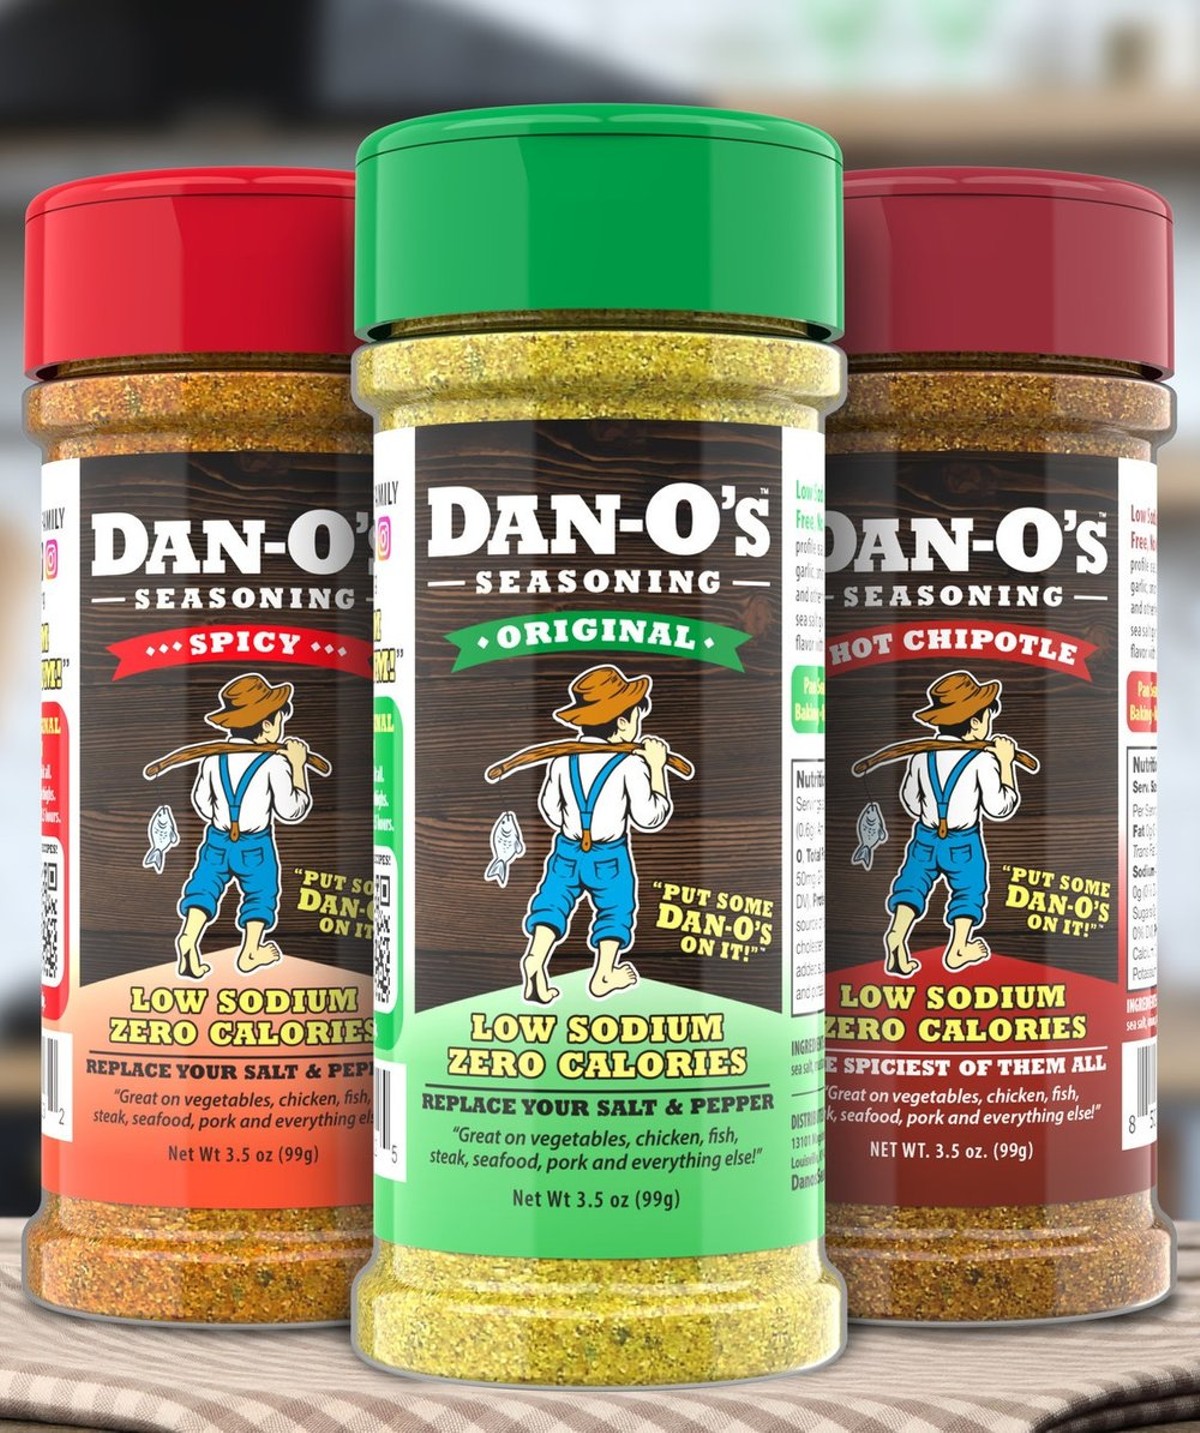 All Three flavors of Dan-O's Seasoning: Original, Spicy, and Hot Chipotle